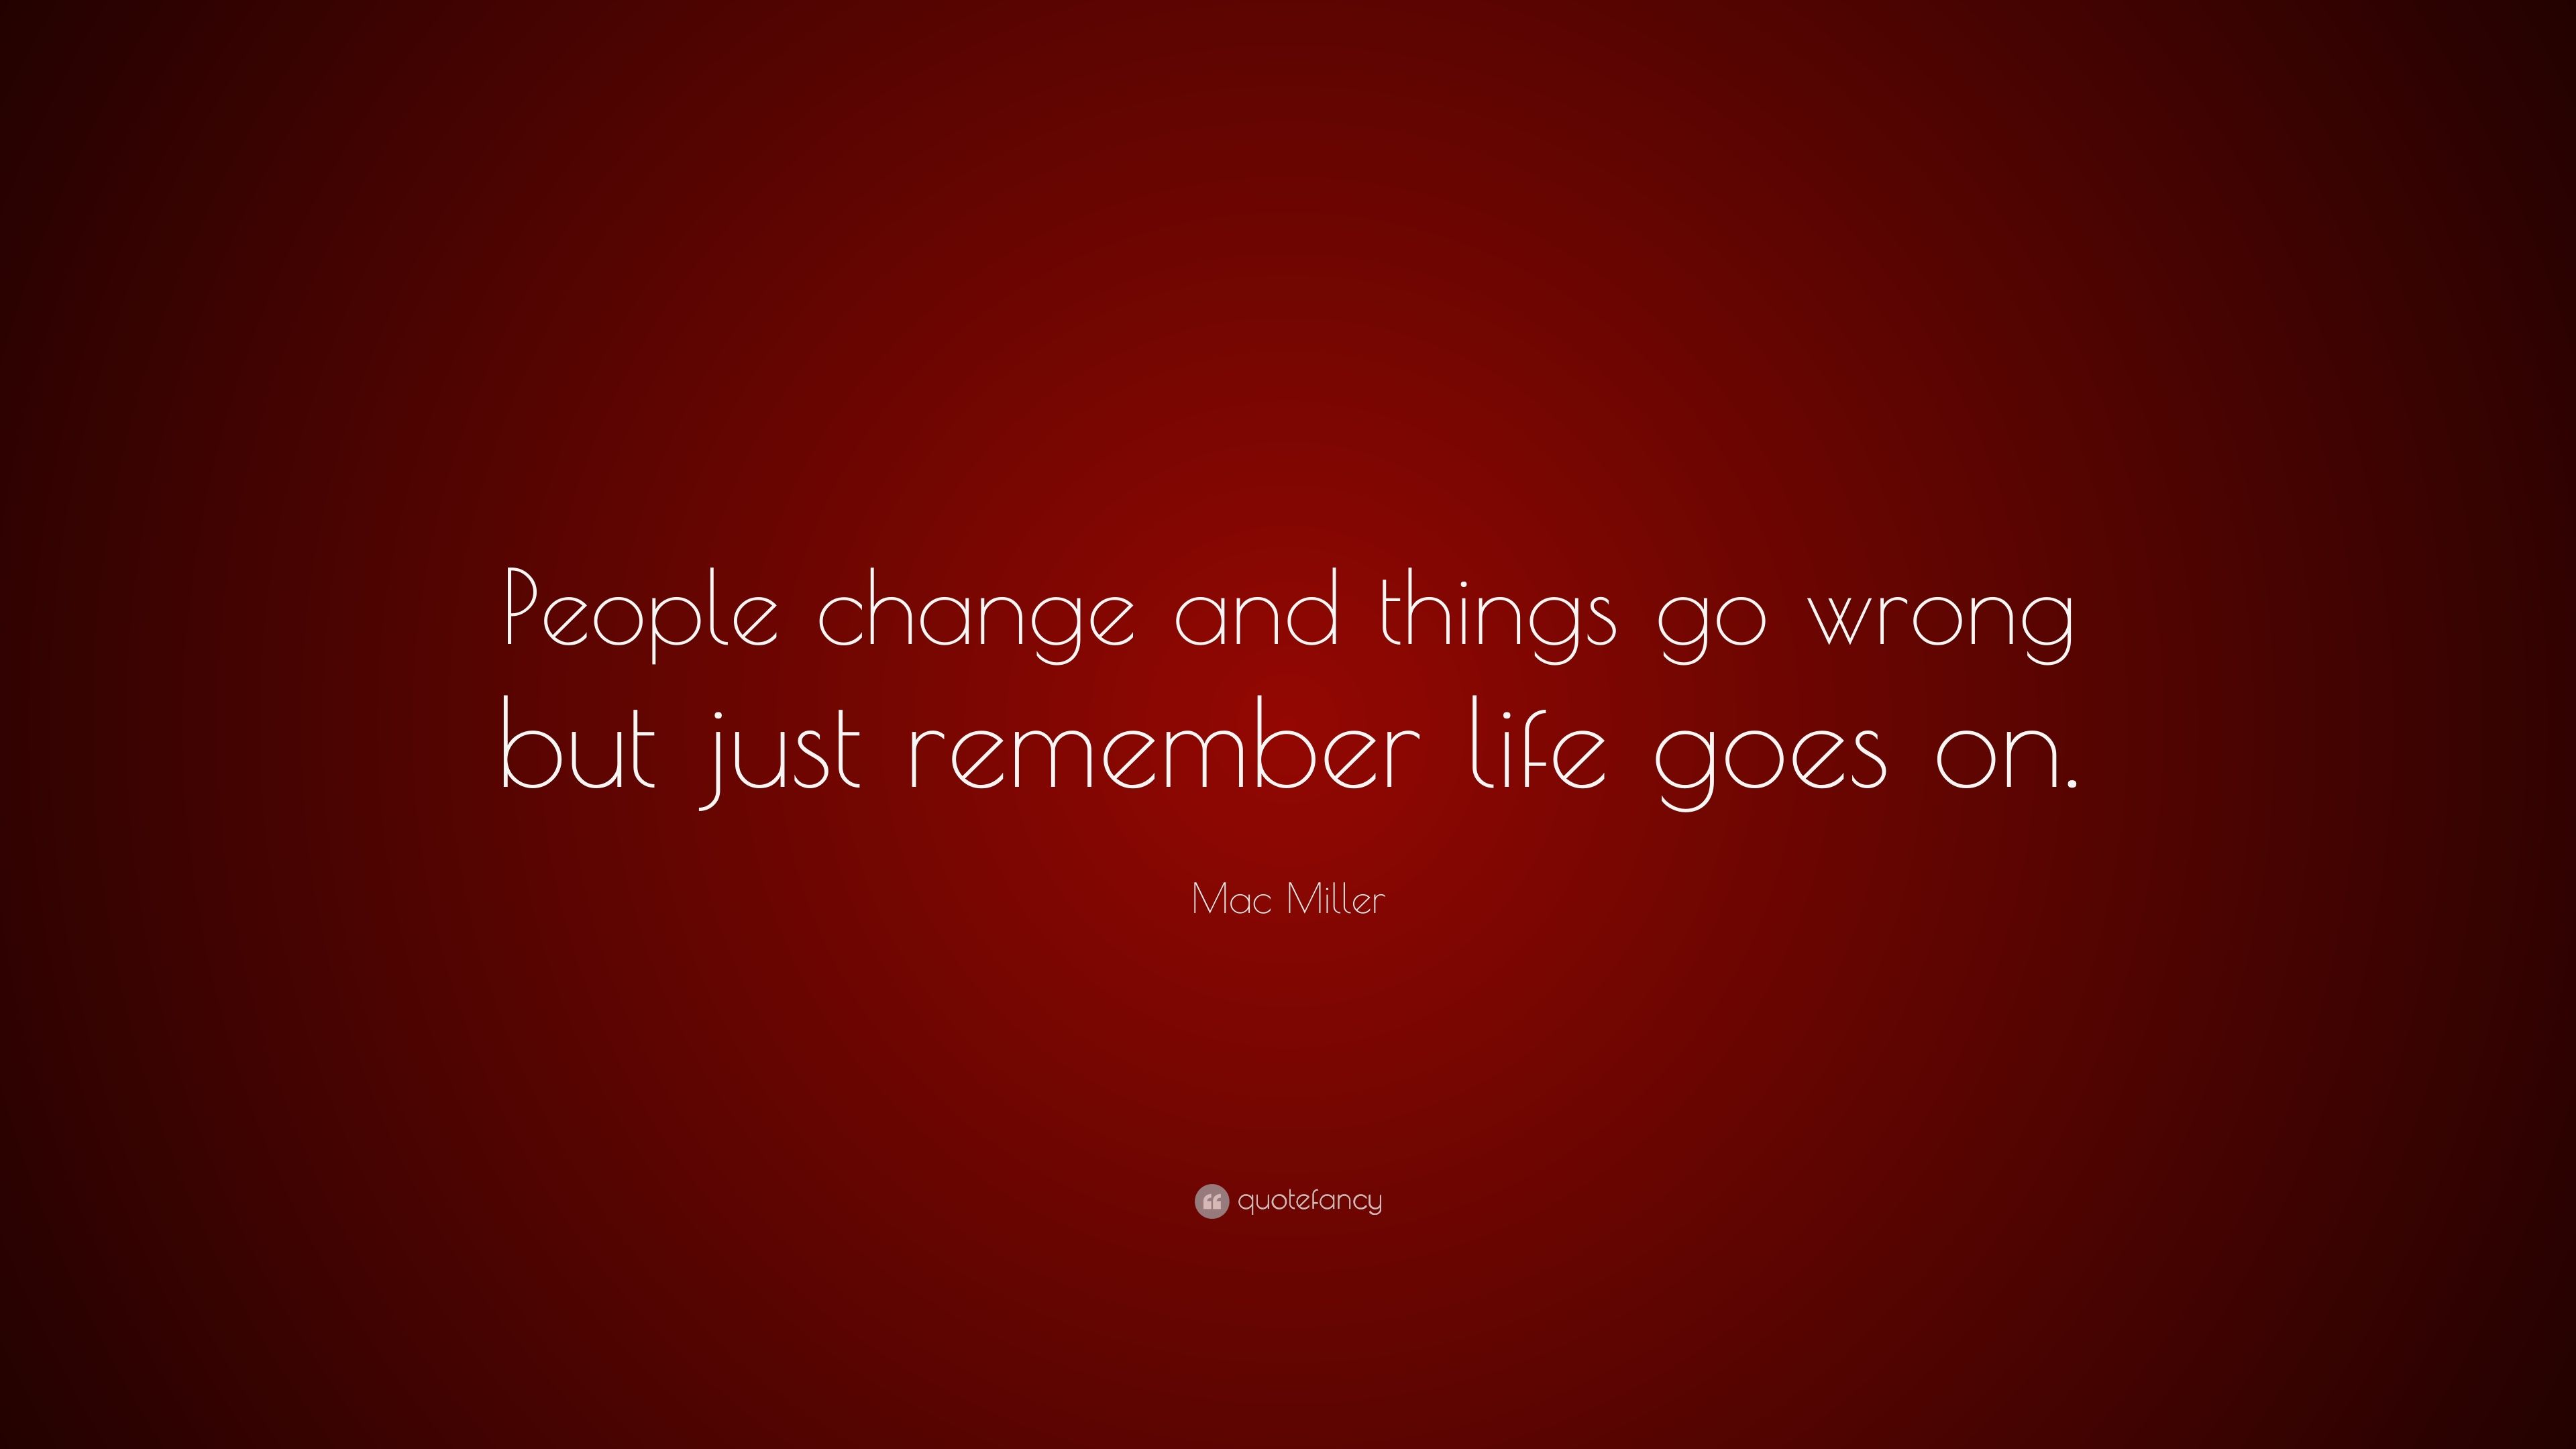 Mac Miller Quote: “People change and things go wrong but just